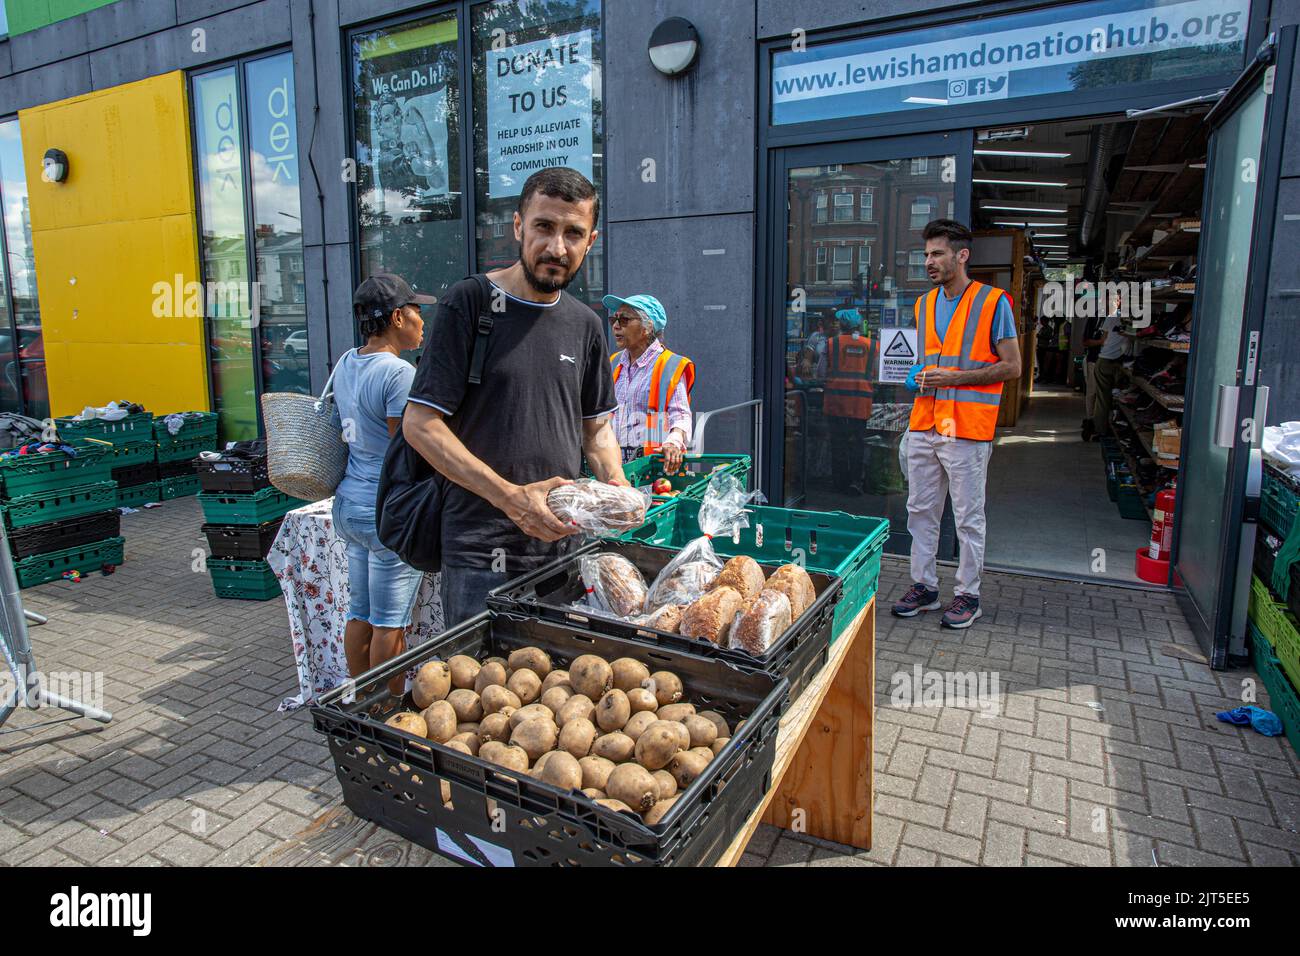 Male collecting food from local food bank in South-West London , England Stock Photo